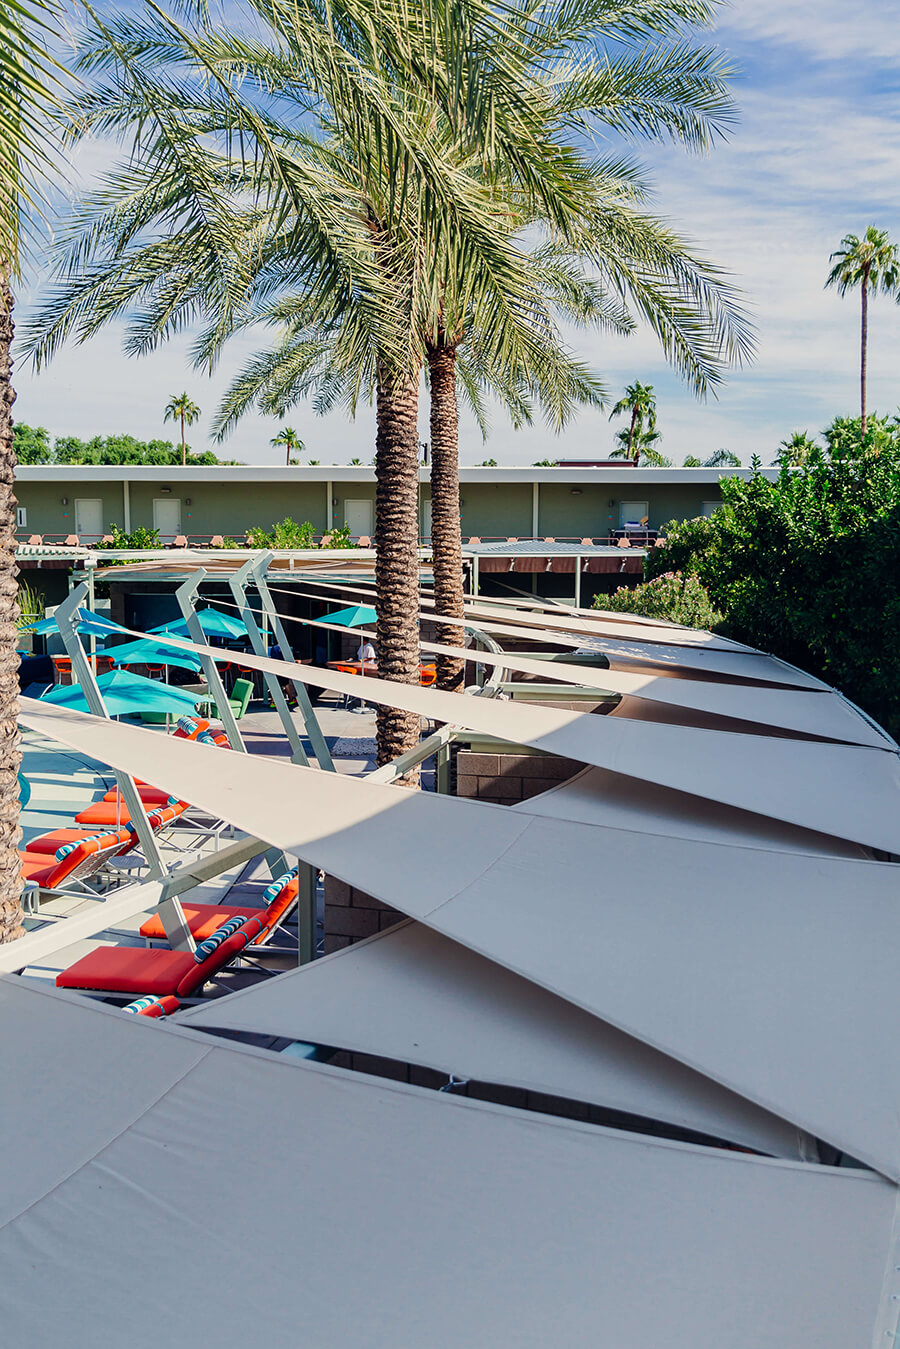 Shade sail with beige Sunbrella Contour fabric installed at hotel pool with palm trees in background